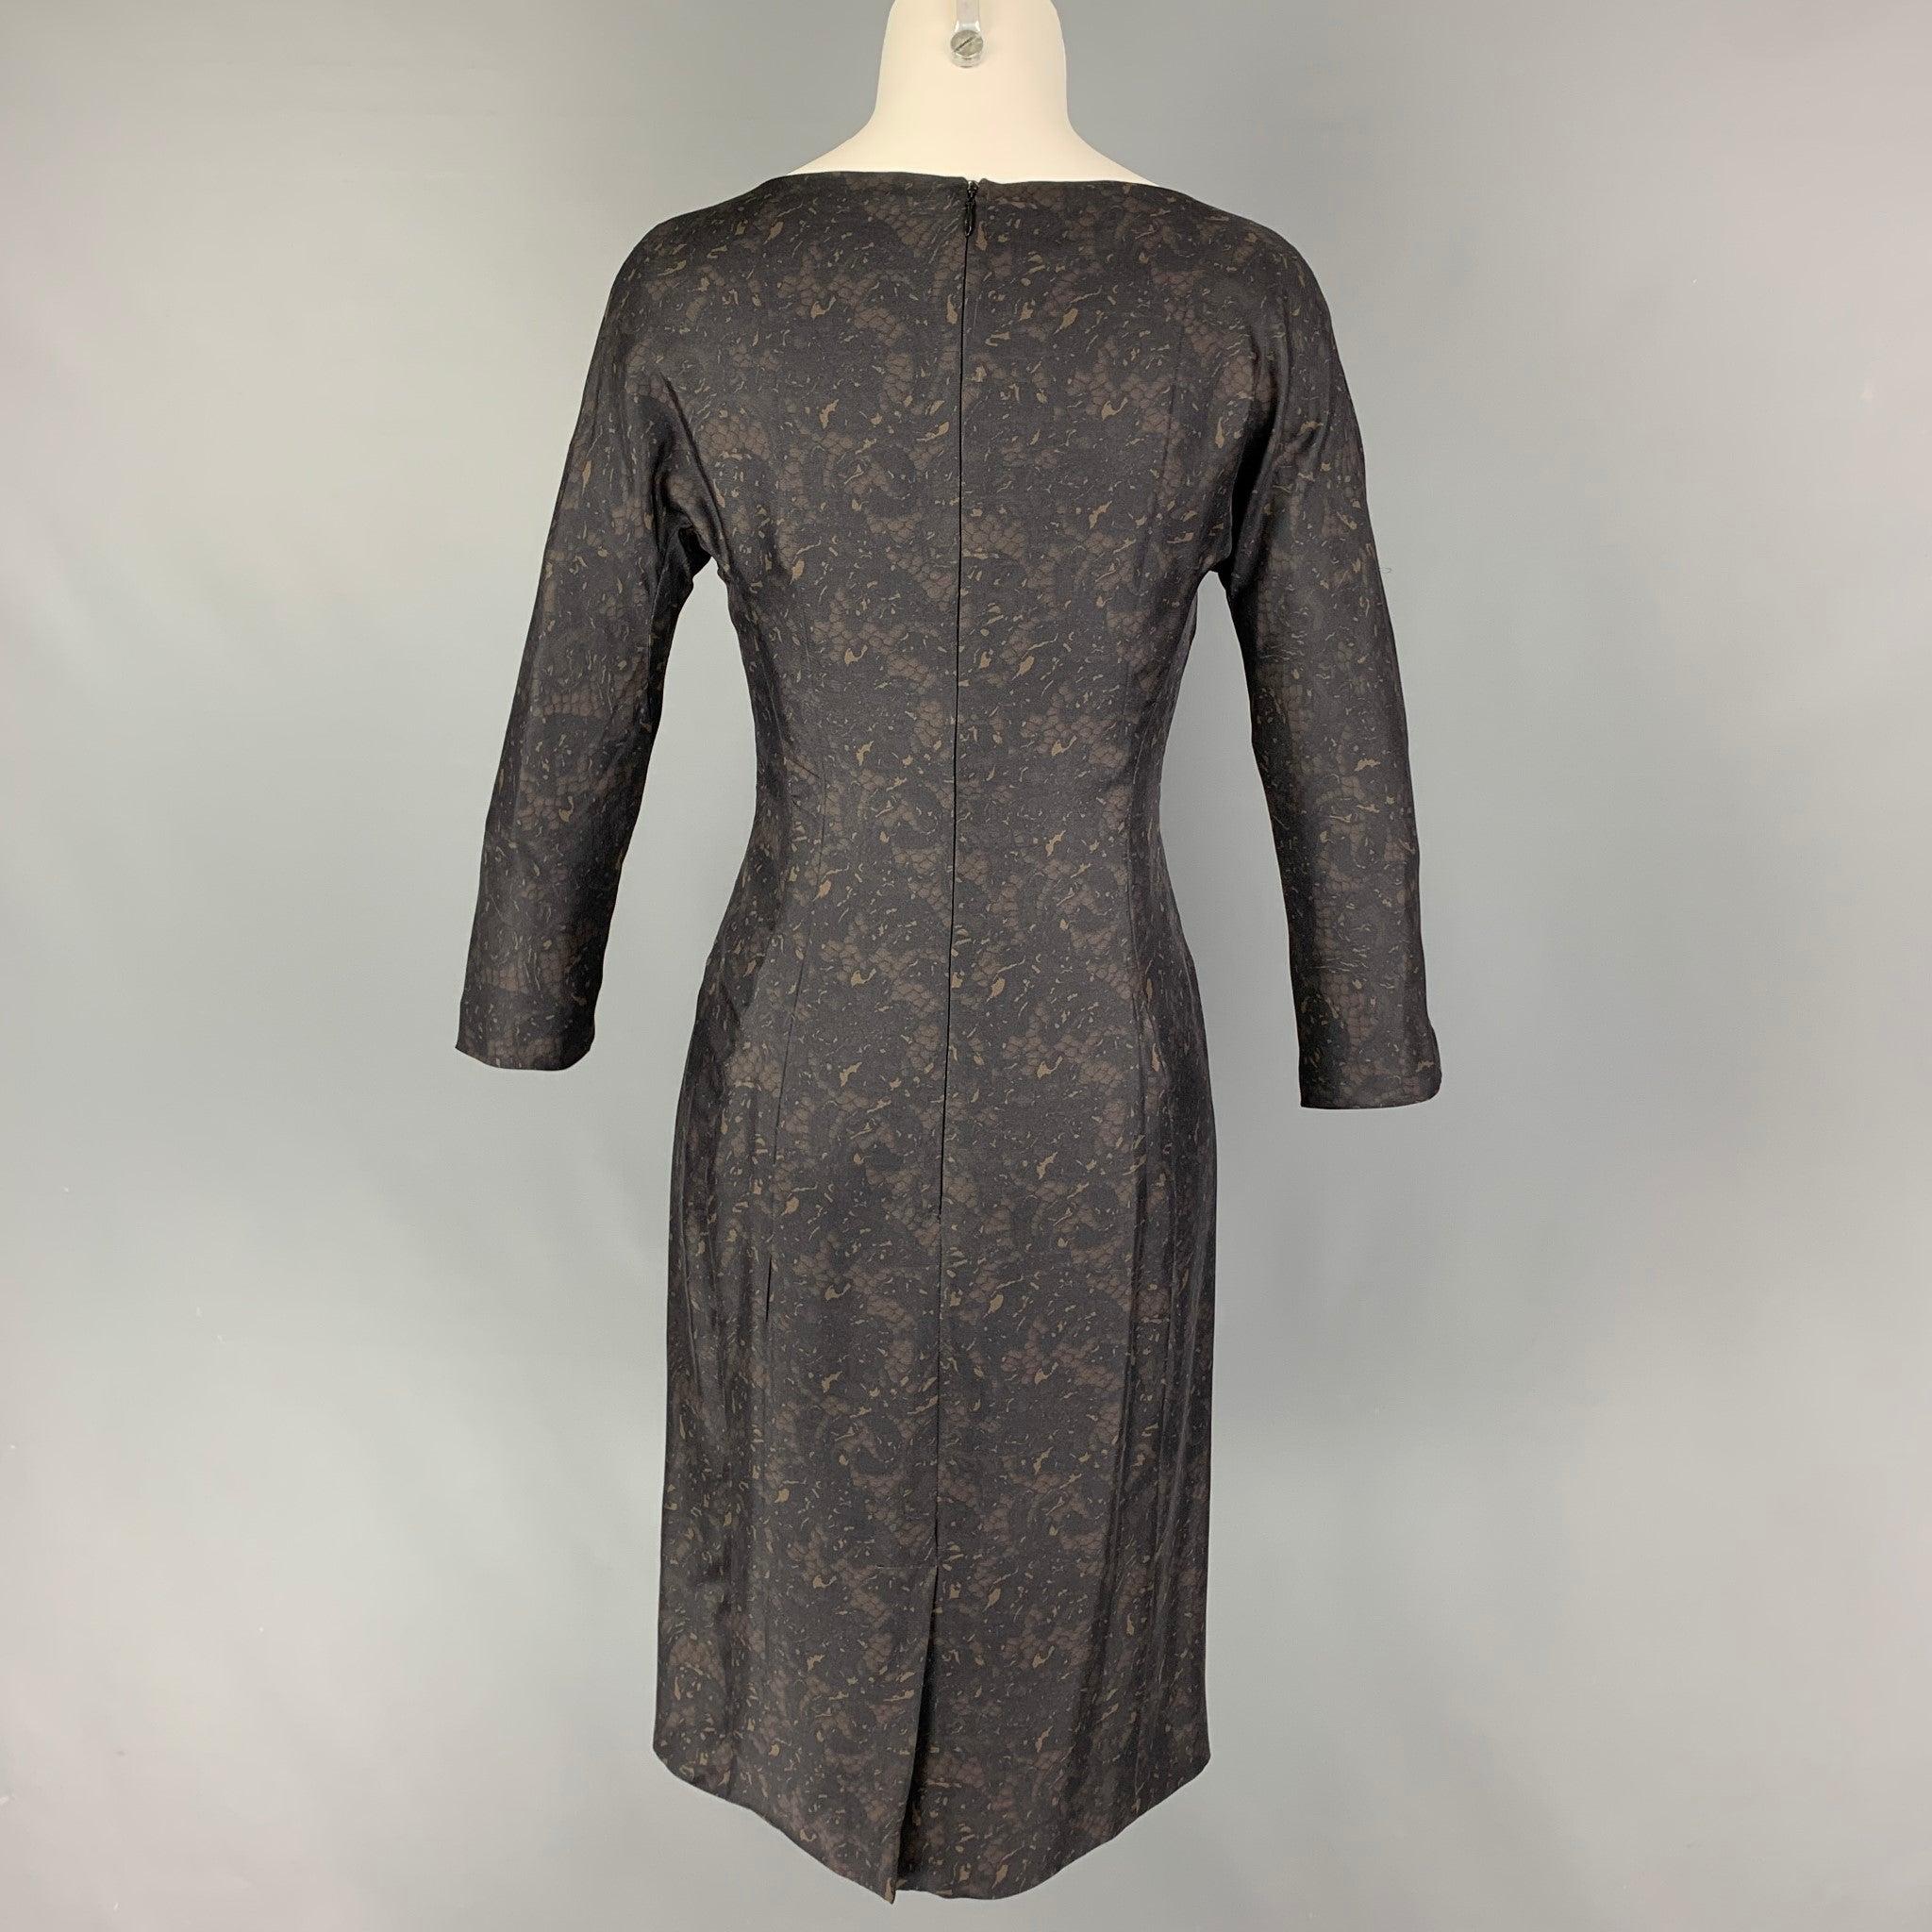 PRADA Size 2 Black Brown Silk Lace Print 3/4 Sleeves Dress In Good Condition For Sale In San Francisco, CA